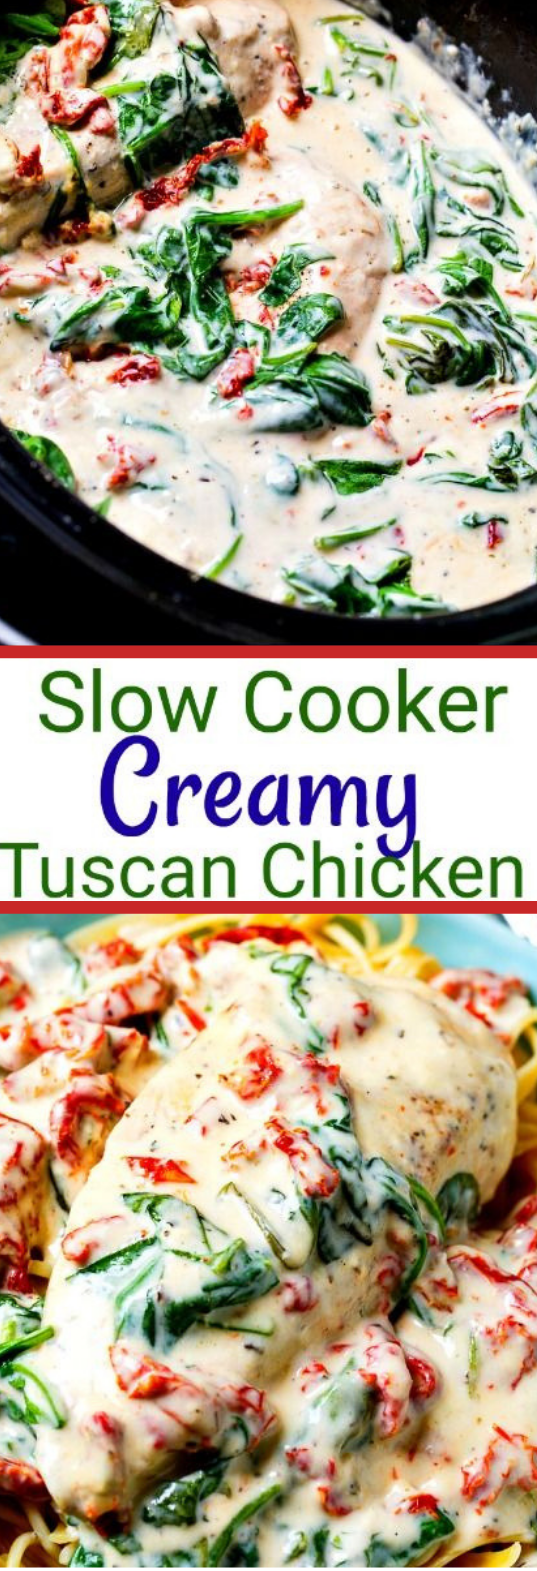 Slow Cooker Creamy Tuscan Chicken #dinner #tuscan